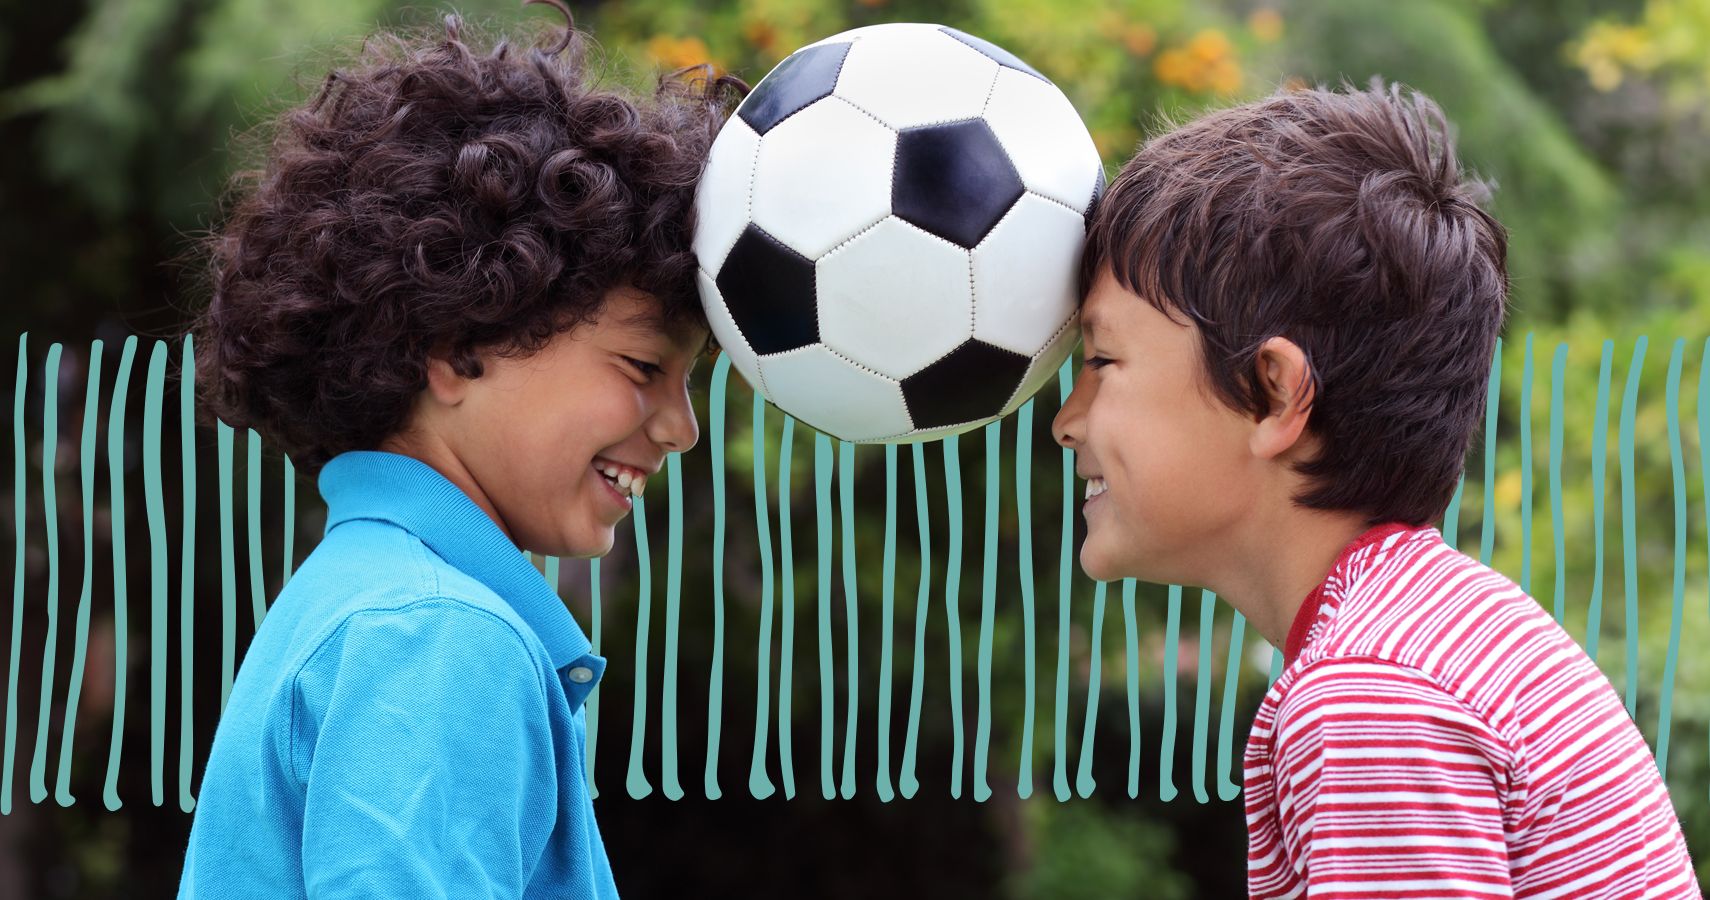 Study Finds Sports A Great Tool For Young Boys With Behavioral Issues